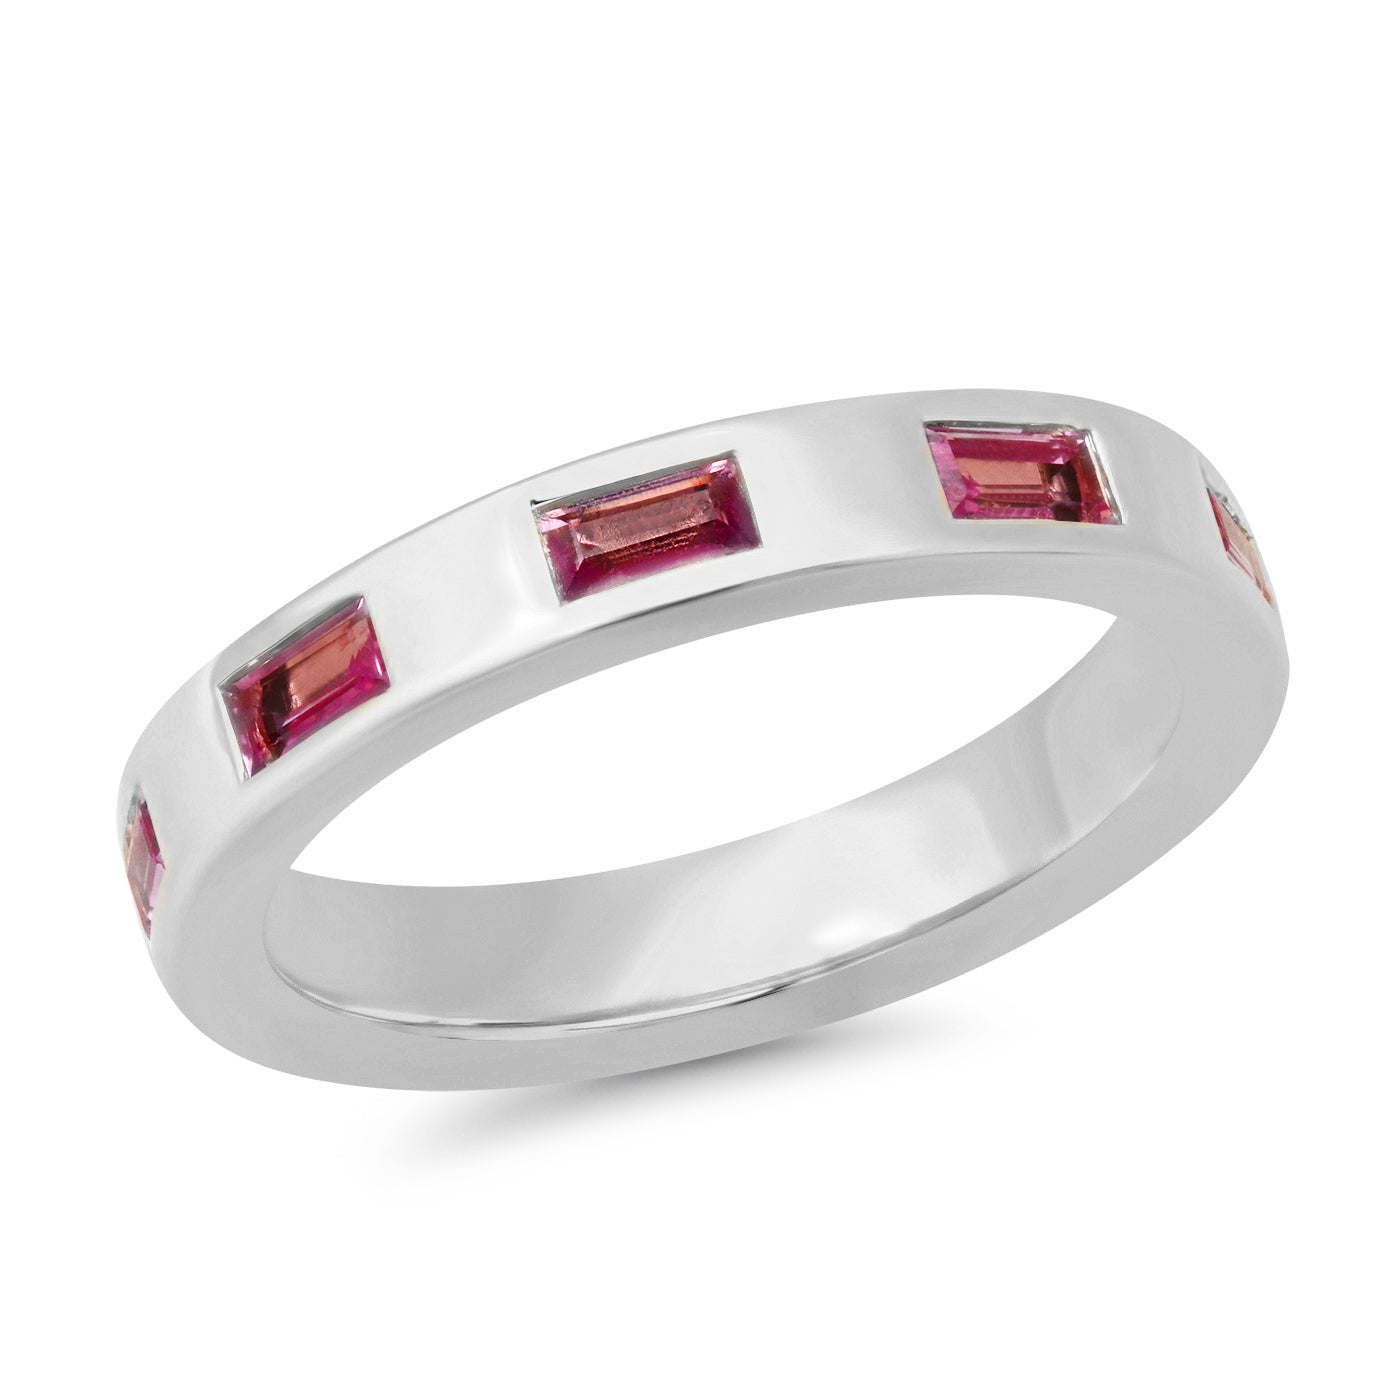 14K White Gold Stationary Pink Sapphire Baguette Ring